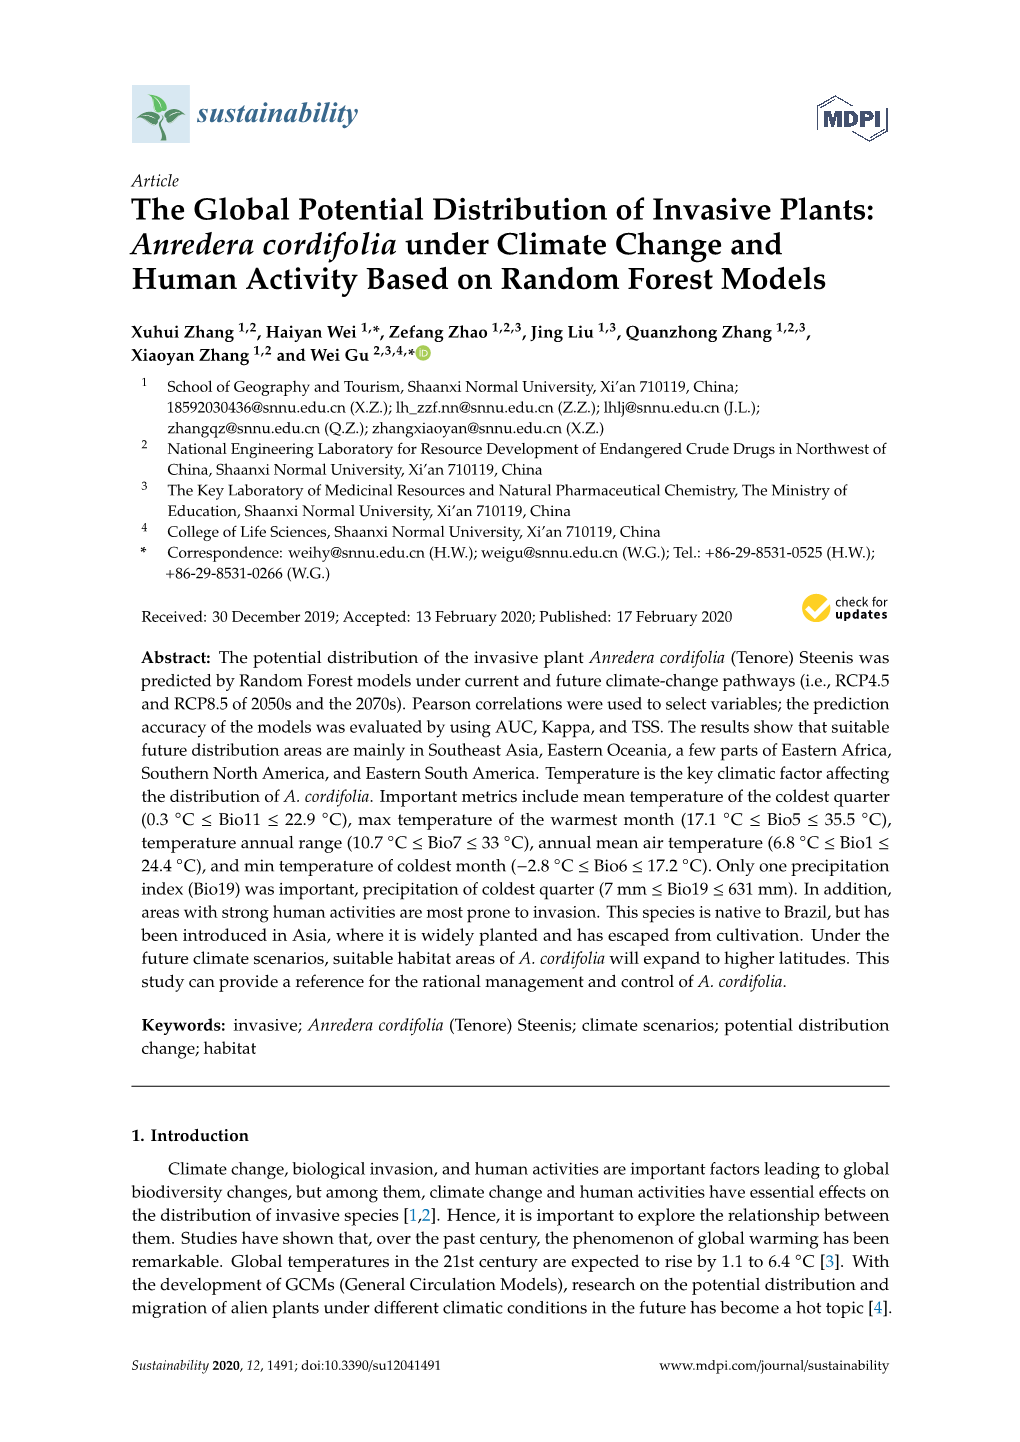 The Global Potential Distribution of Invasive Plants: Anredera Cordifolia Under Climate Change and Human Activity Based on Random Forest Models